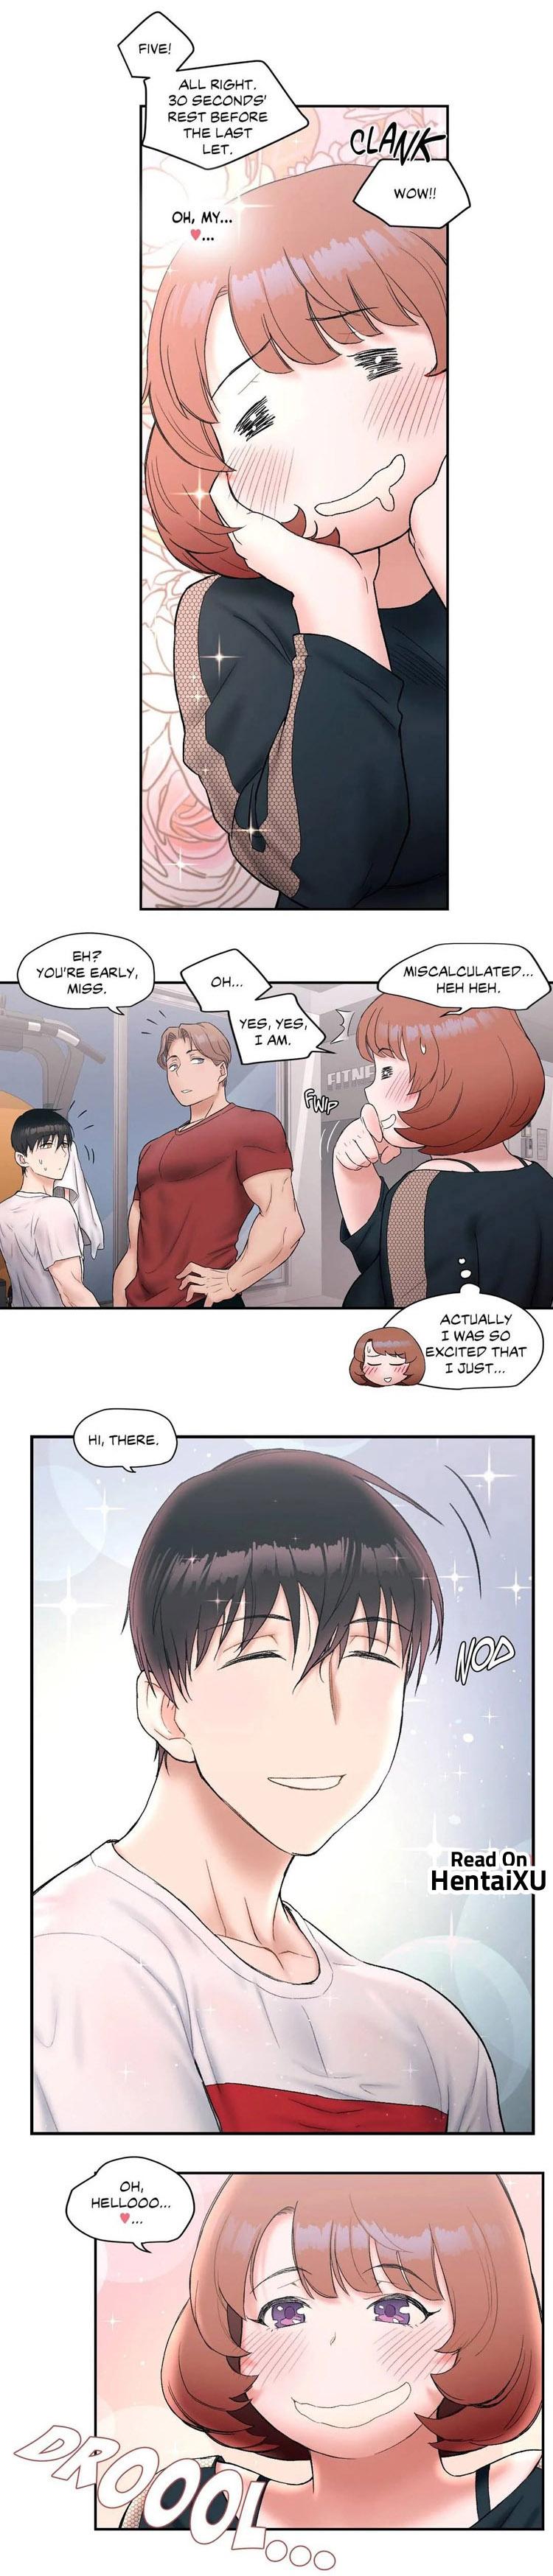 Sexercise Ch.17/? 137